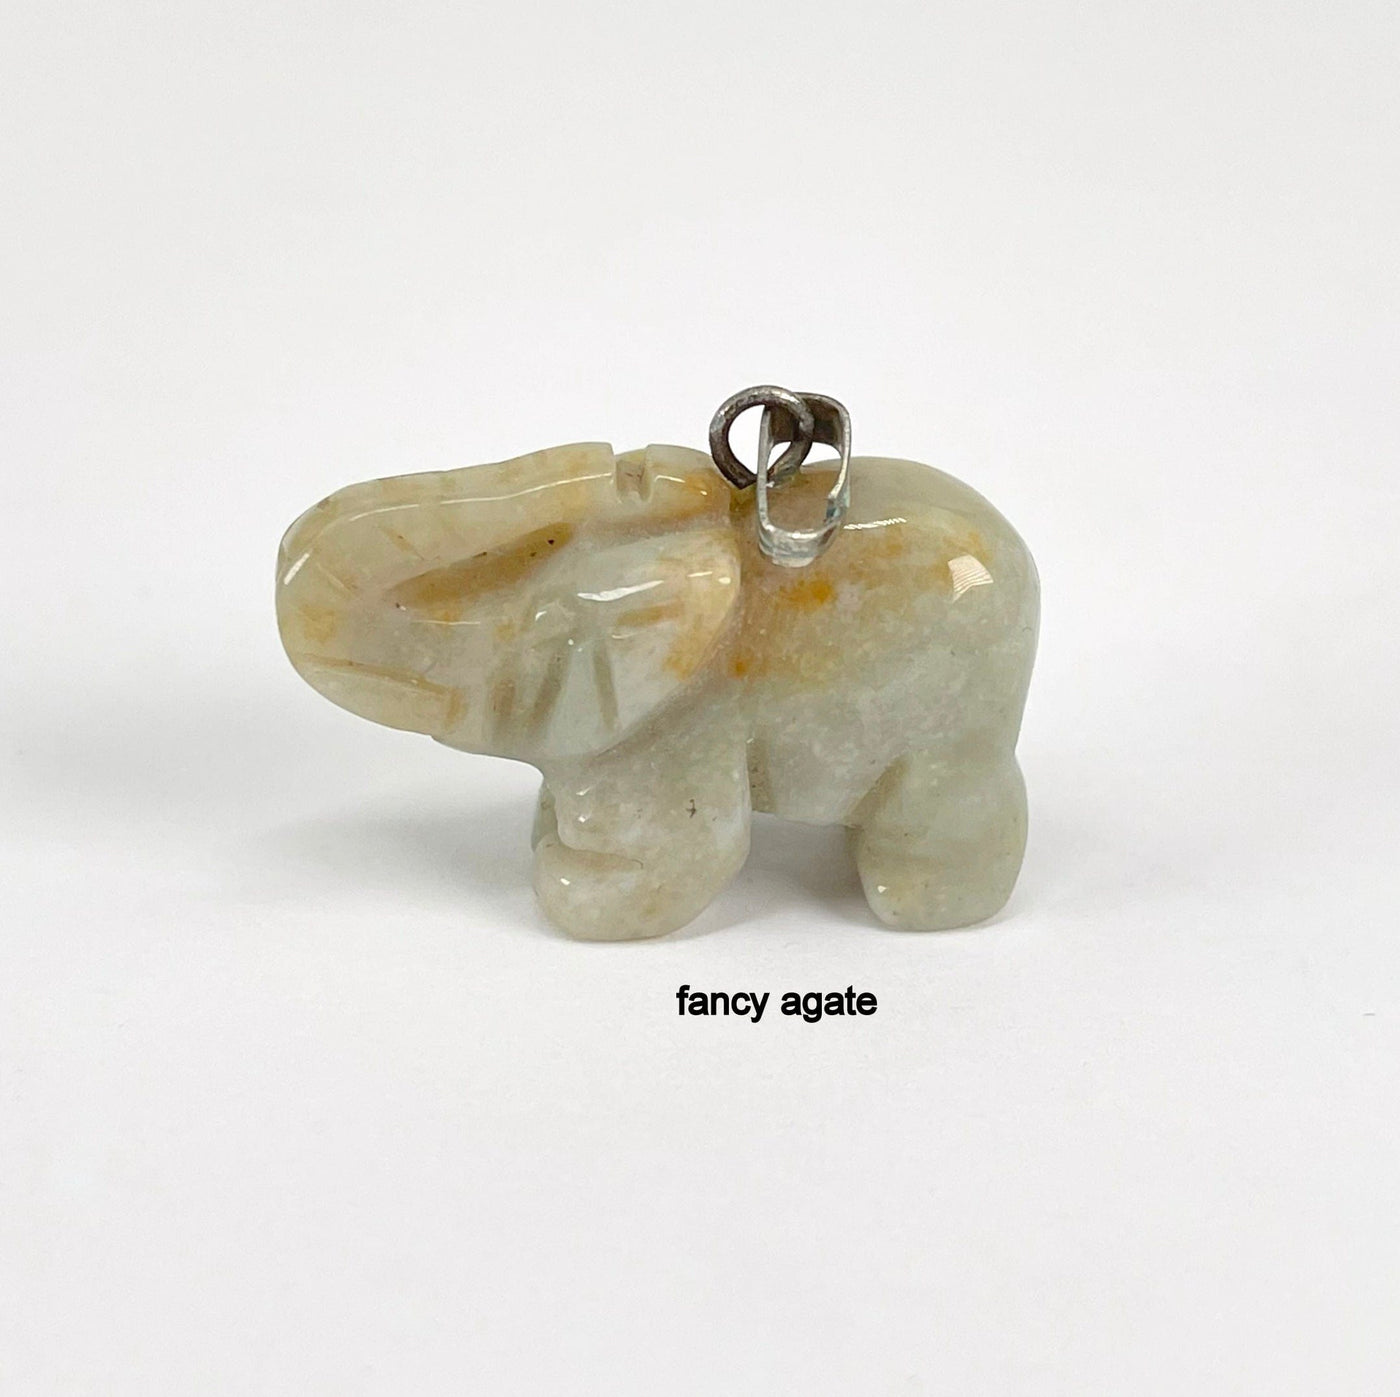 close up of fancy agate elephant pendant for details